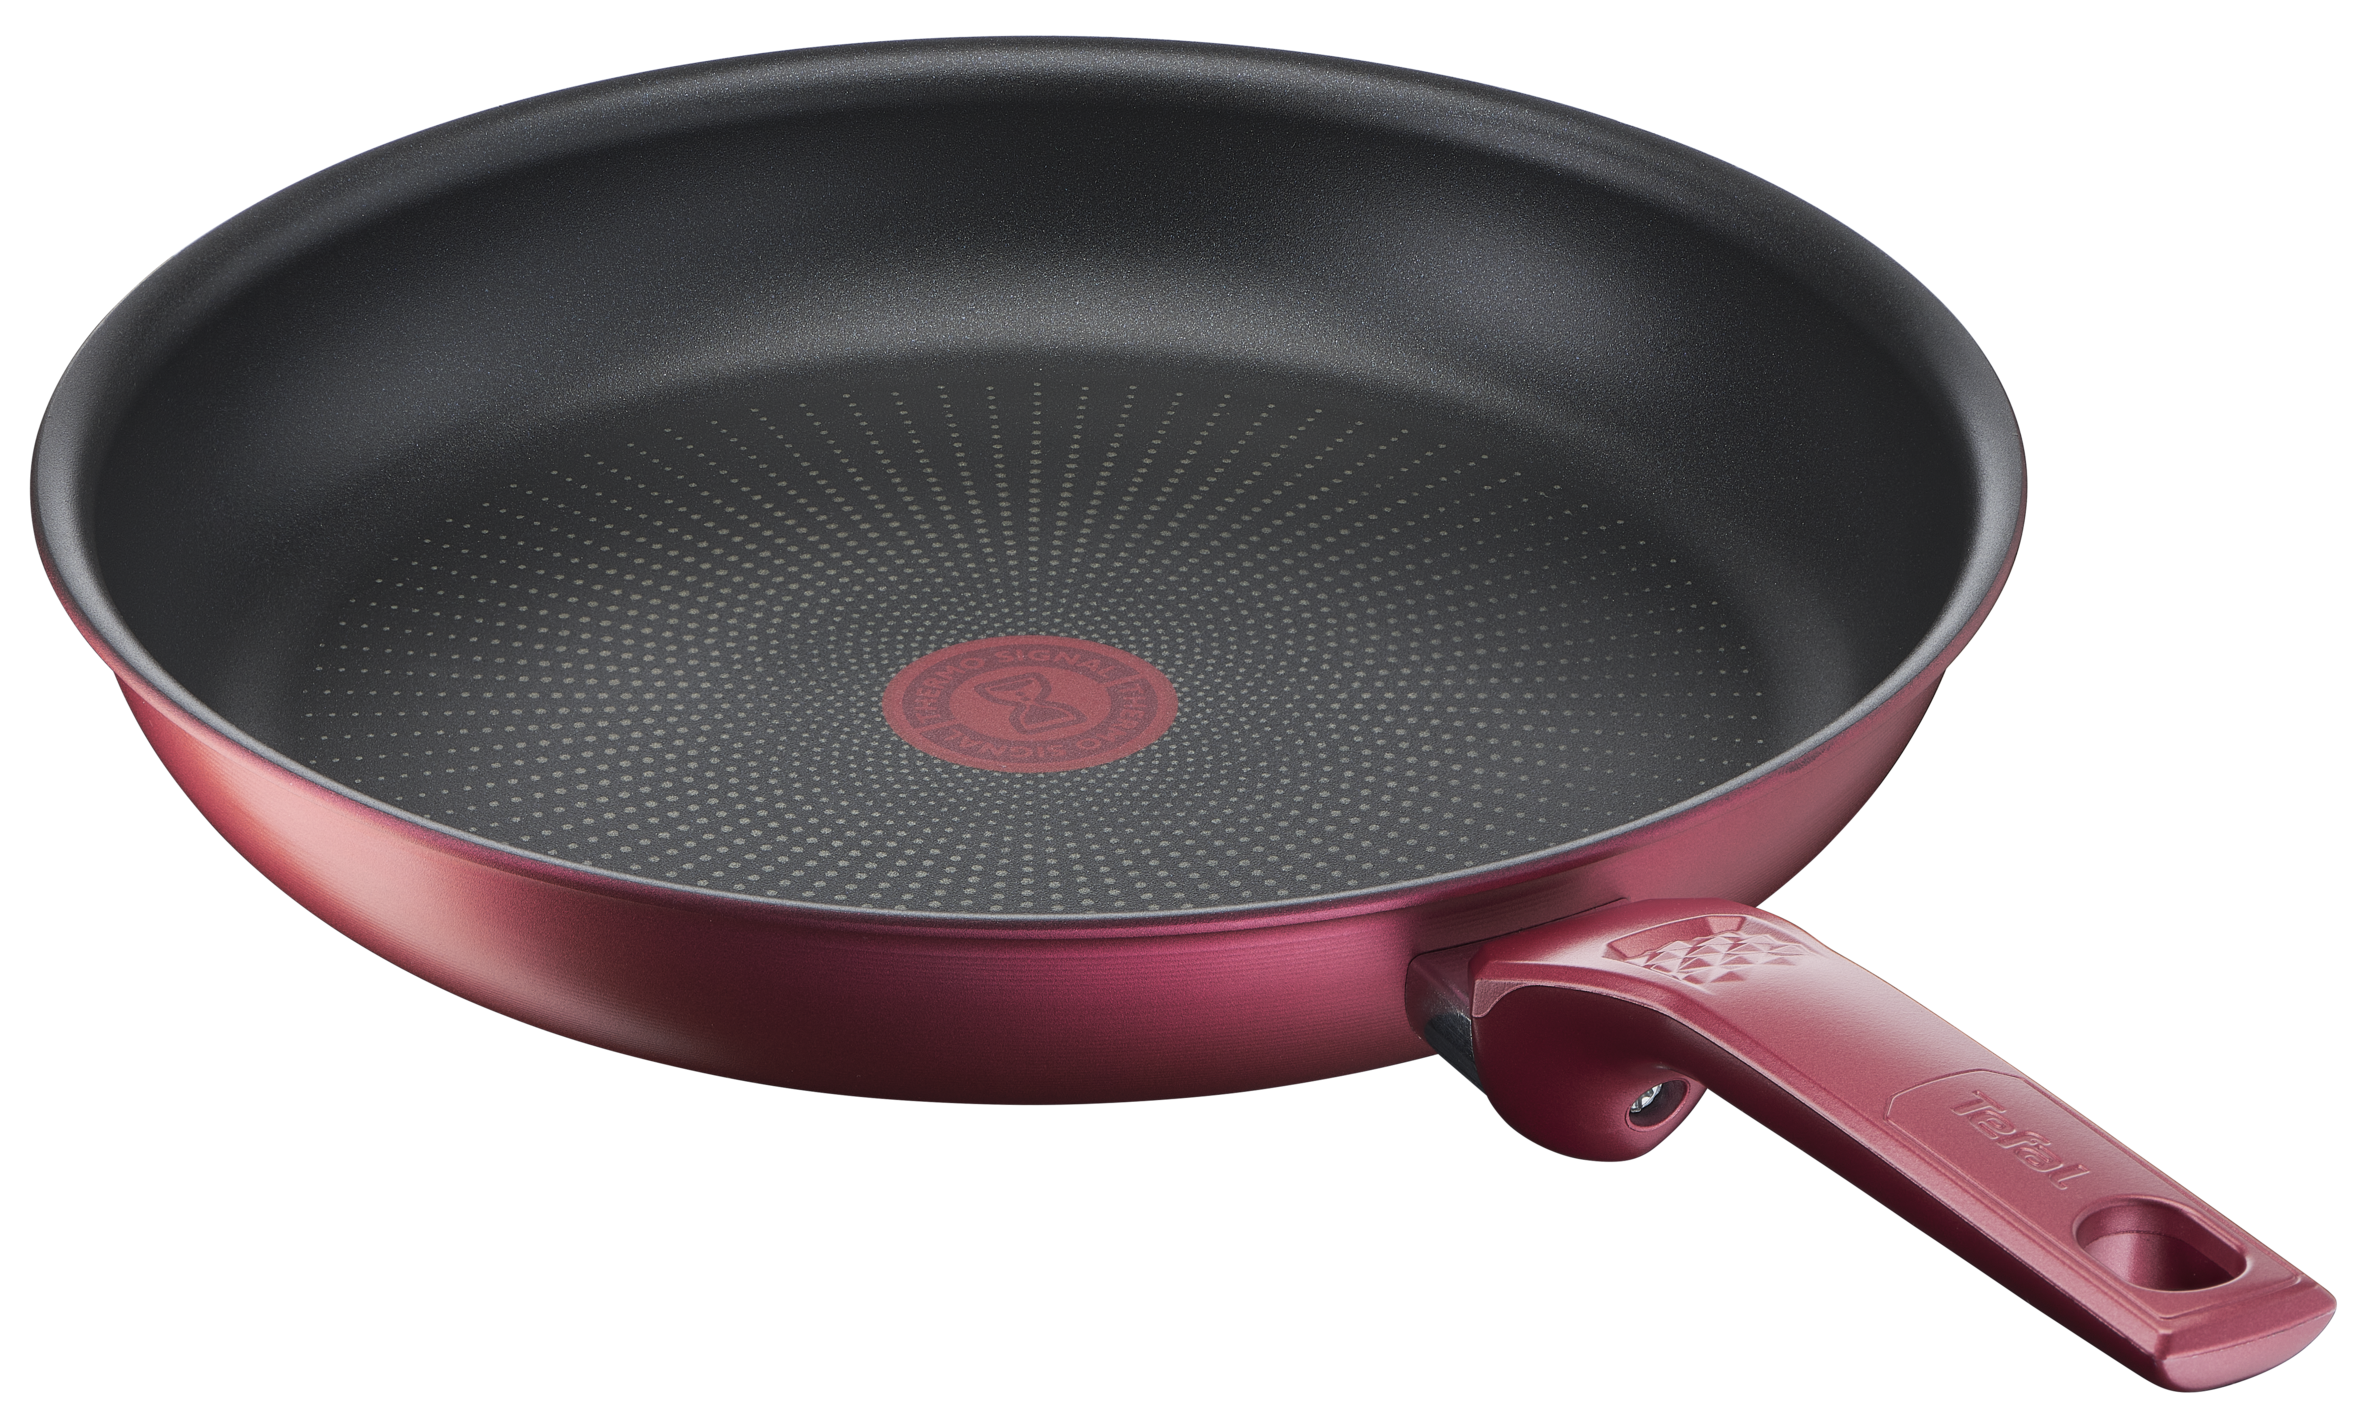 Tefal Daily Chef Red Non-Stick Induction Frypan 28cm